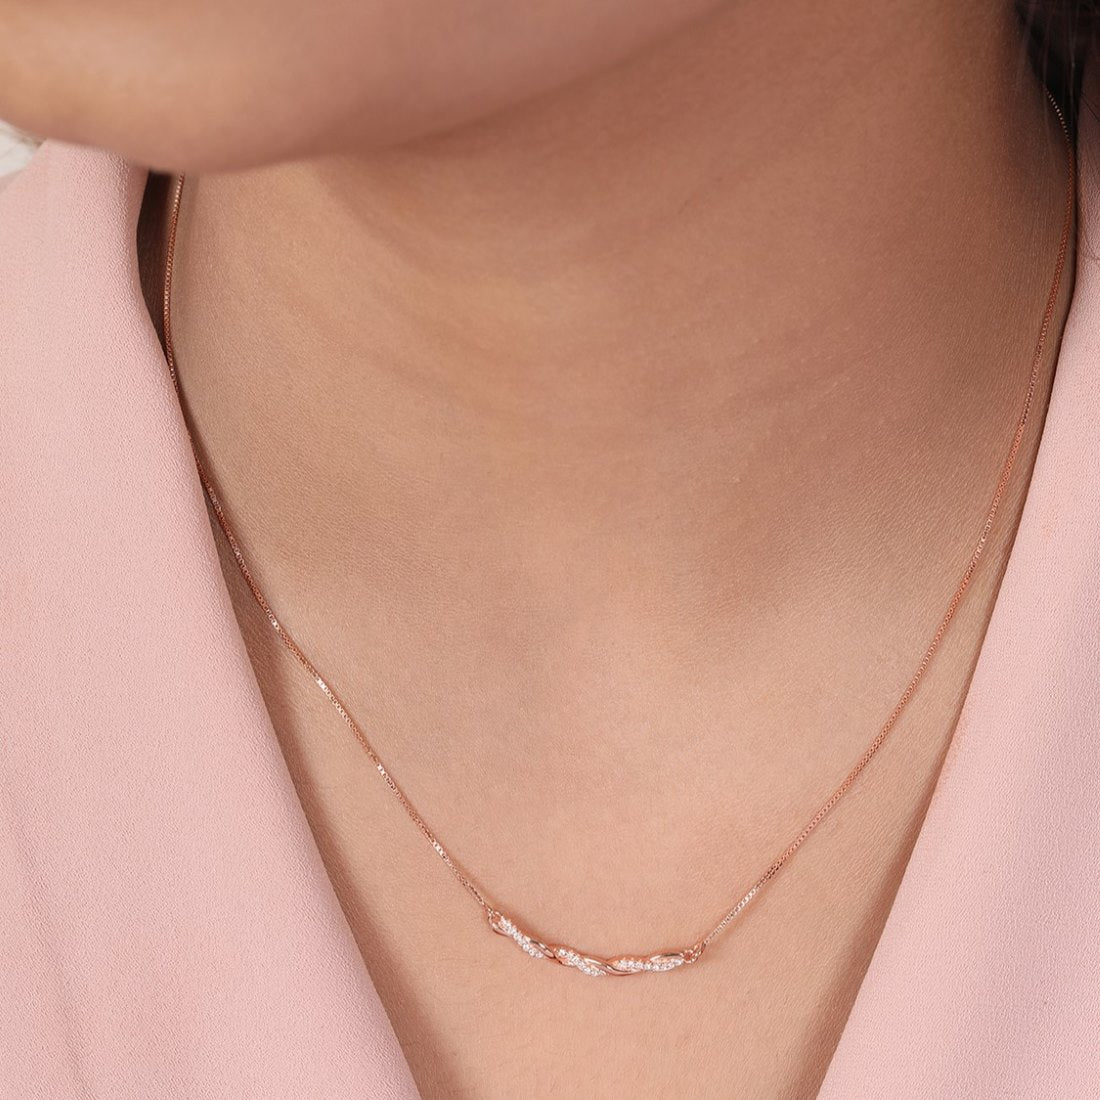 Abstract Radiance Rose Gold Plated 925 Sterling Silver Necklace